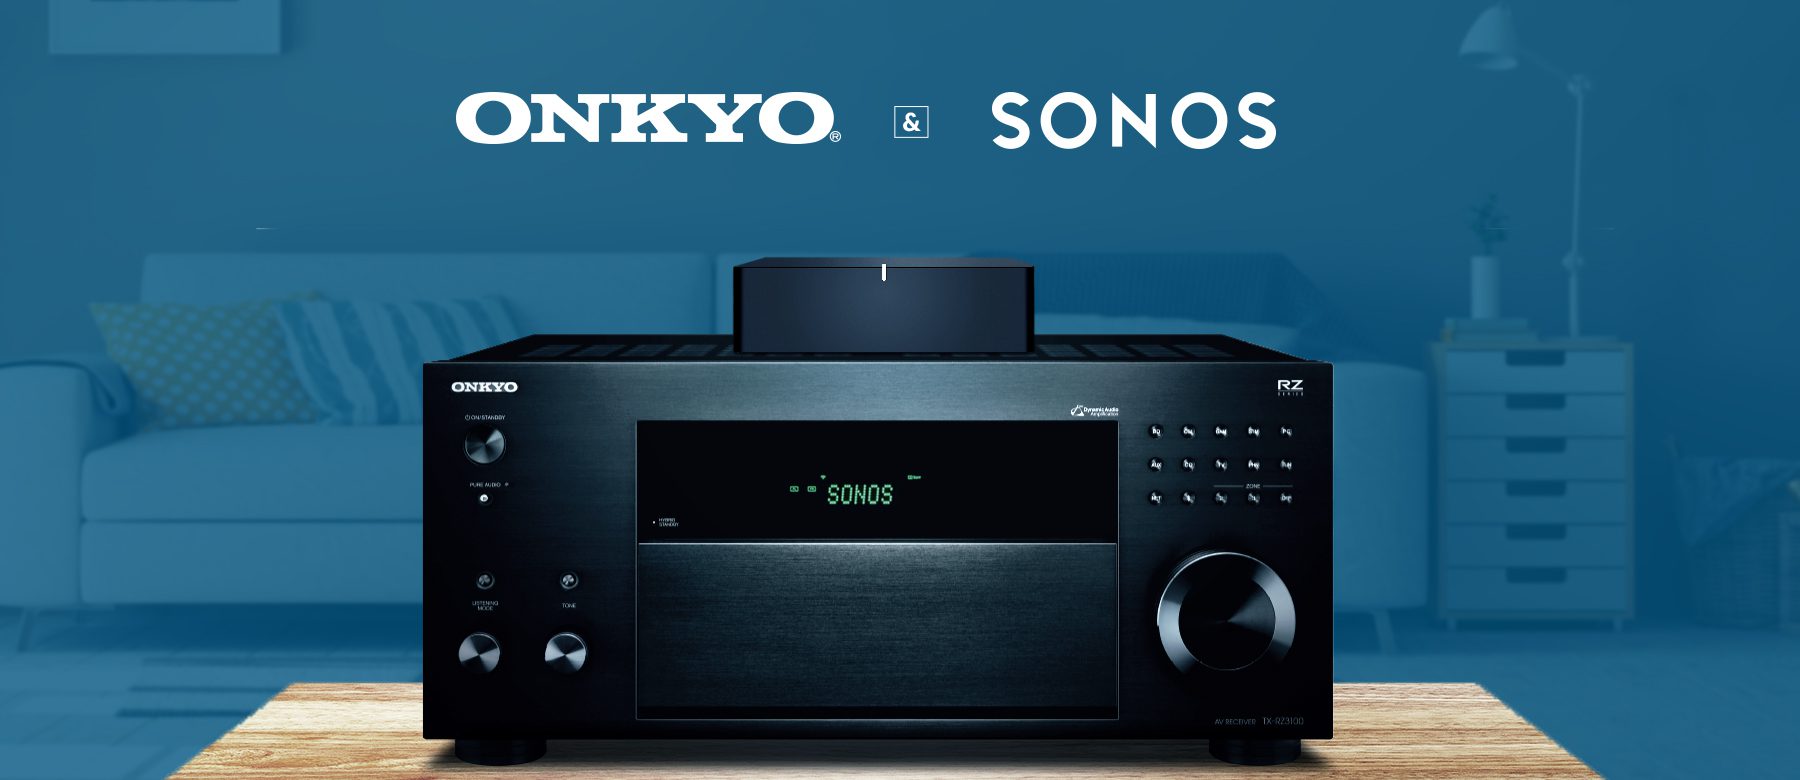 excitation Kan ignoreres Rendezvous WORLD'S FIRST & ONLY 'WORKS WITH SONOS' CERTIFIED AV RECEIVERS GET NEW  FIRMWARE UPDATE AS ONKYO USA REVEALS SONOS VOLUME PASS-THROUGH  FUNCTIONALITY | CEDIA Expo